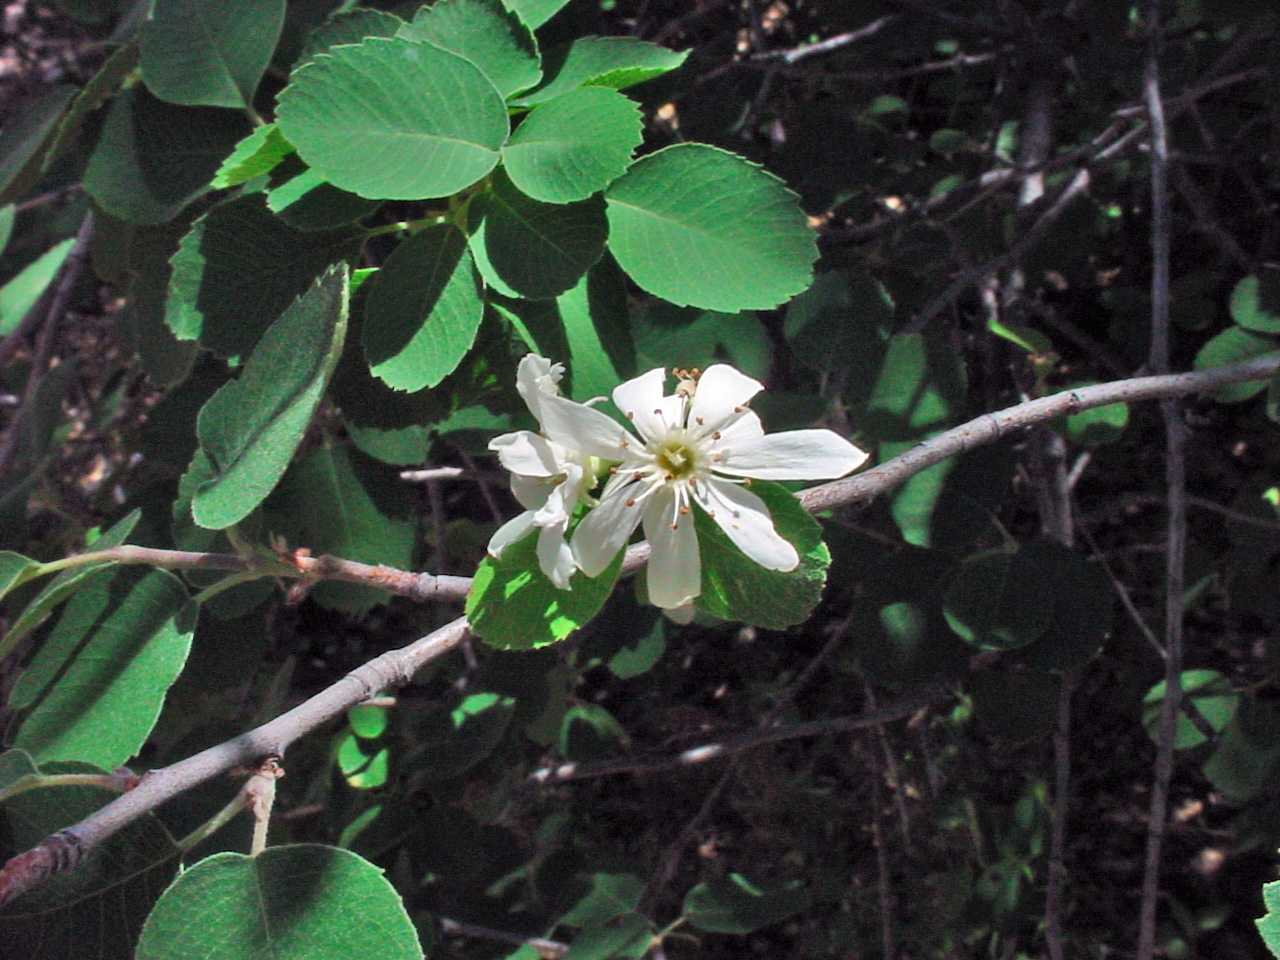 Blossoms have a spreading habit with petals generously spaced